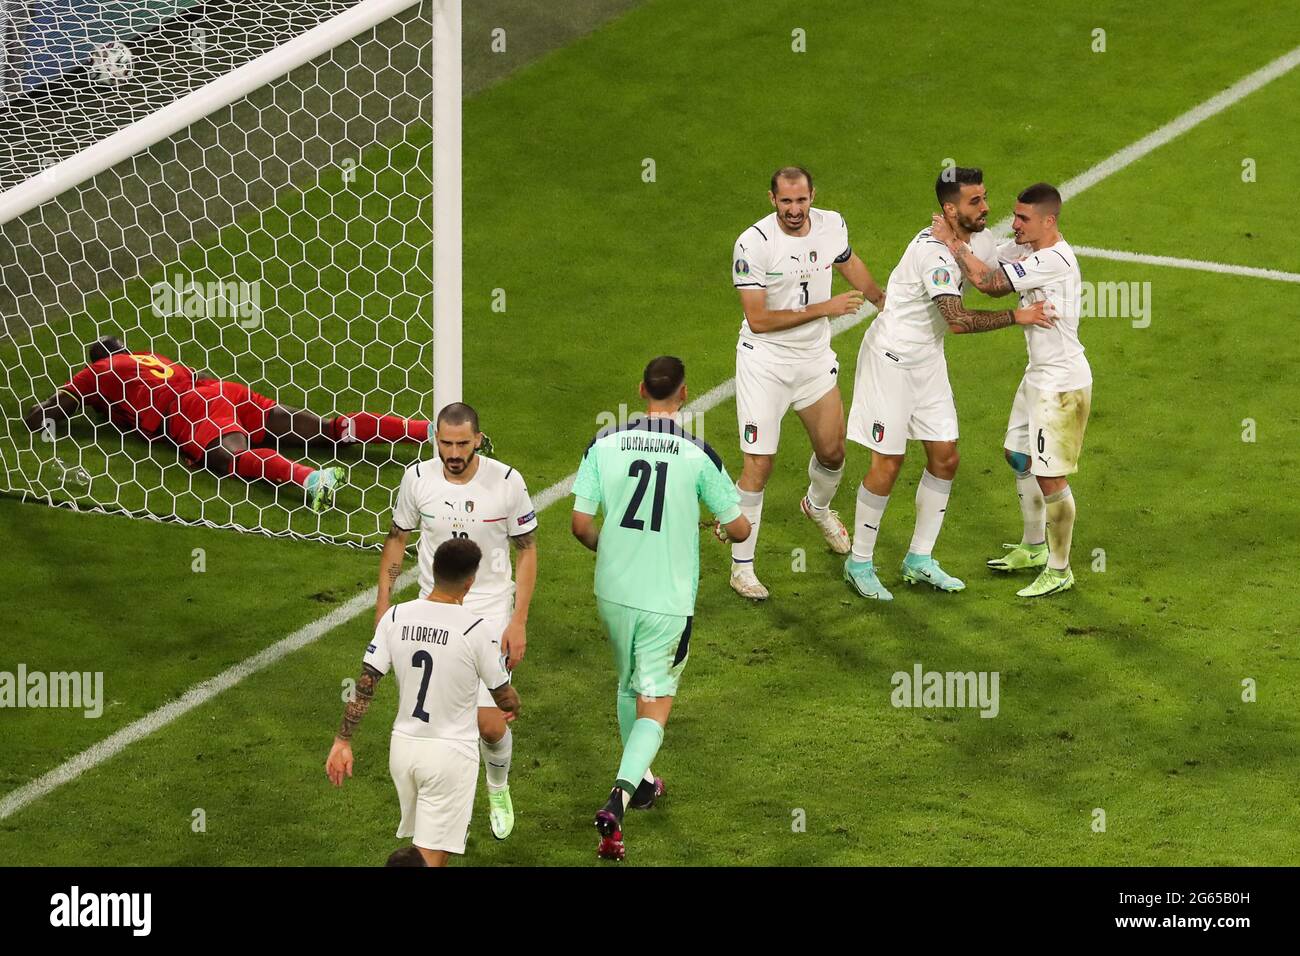 Munich, Germany. 2nd July, 2021. Marco Verratti (top R) and Giorgio Chiellini (top L) of Italy celebrate a defense from teammate Leonardo Spinazzola (top C) during a UEFA Euro 2020 Championship quarterfinal match between Belgium and Italy in Munich, Germany, July 2, 2021. Credit: Shan Yuqi/Xinhua/Alamy Live News Stock Photo